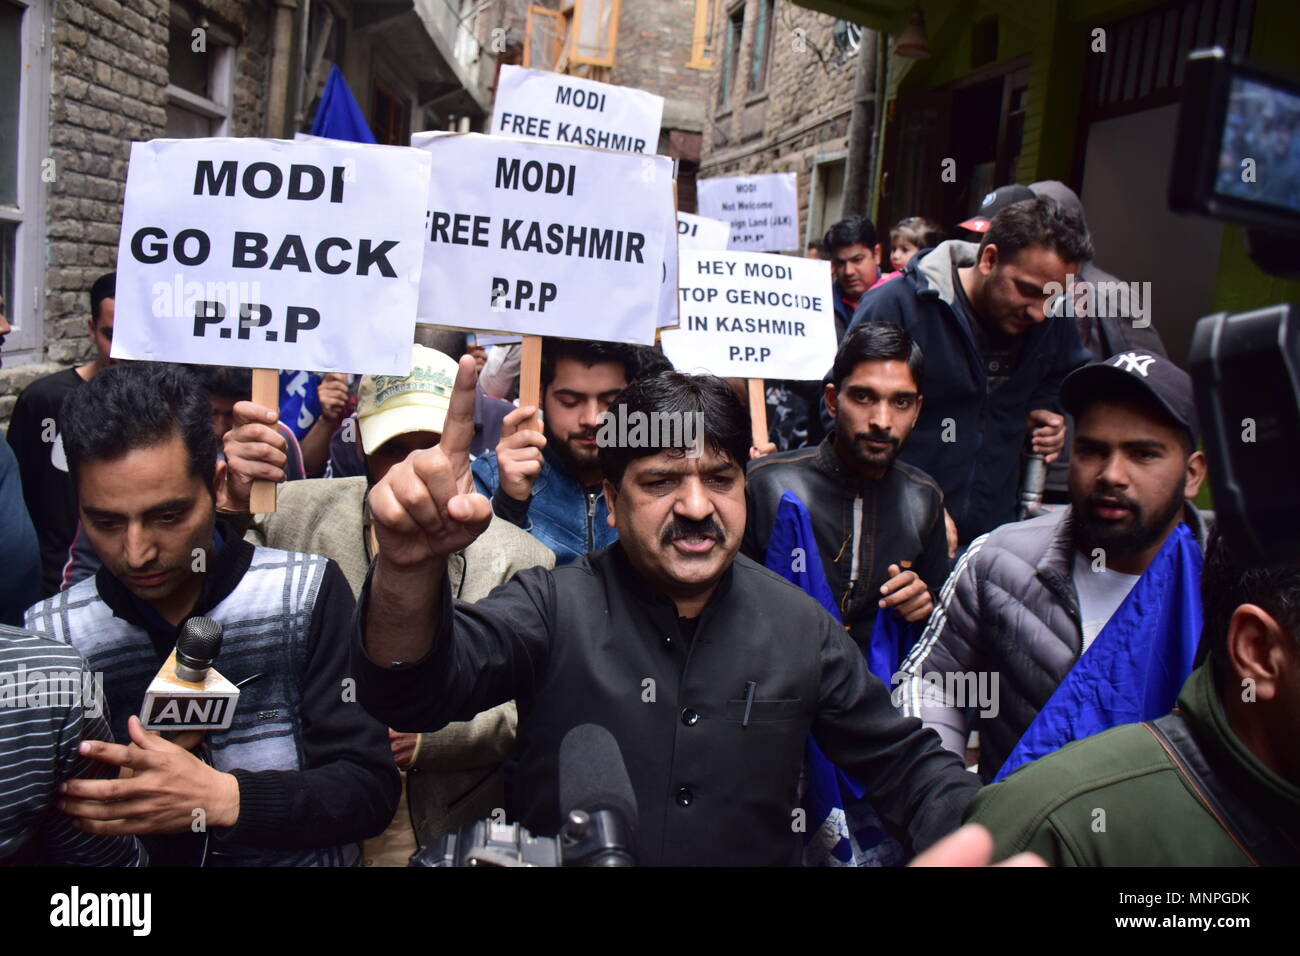 Kashmir, India, May 19, 2018.  People seen holding placards and shouts anti indian, anti Modi slogans during March towards city centre Lal chowk Srinagar.Despite of restrictions in many parts of Srinagar Summer Capital Of Indian Kashmir, people came on streets to march towards the lal chowk (city centre) as the JRL (Joint Resistance Leadership) called for Lal Chowk march to protest the visit of Prime Minister Narendra Modi to the state. Restrictions were imposed in many parts of Srinagar to prevent the protest march called by JRL. (Credit Image: © Abbas Idrees/SOPA Images Credit: ZUMA Press, I Stock Photo